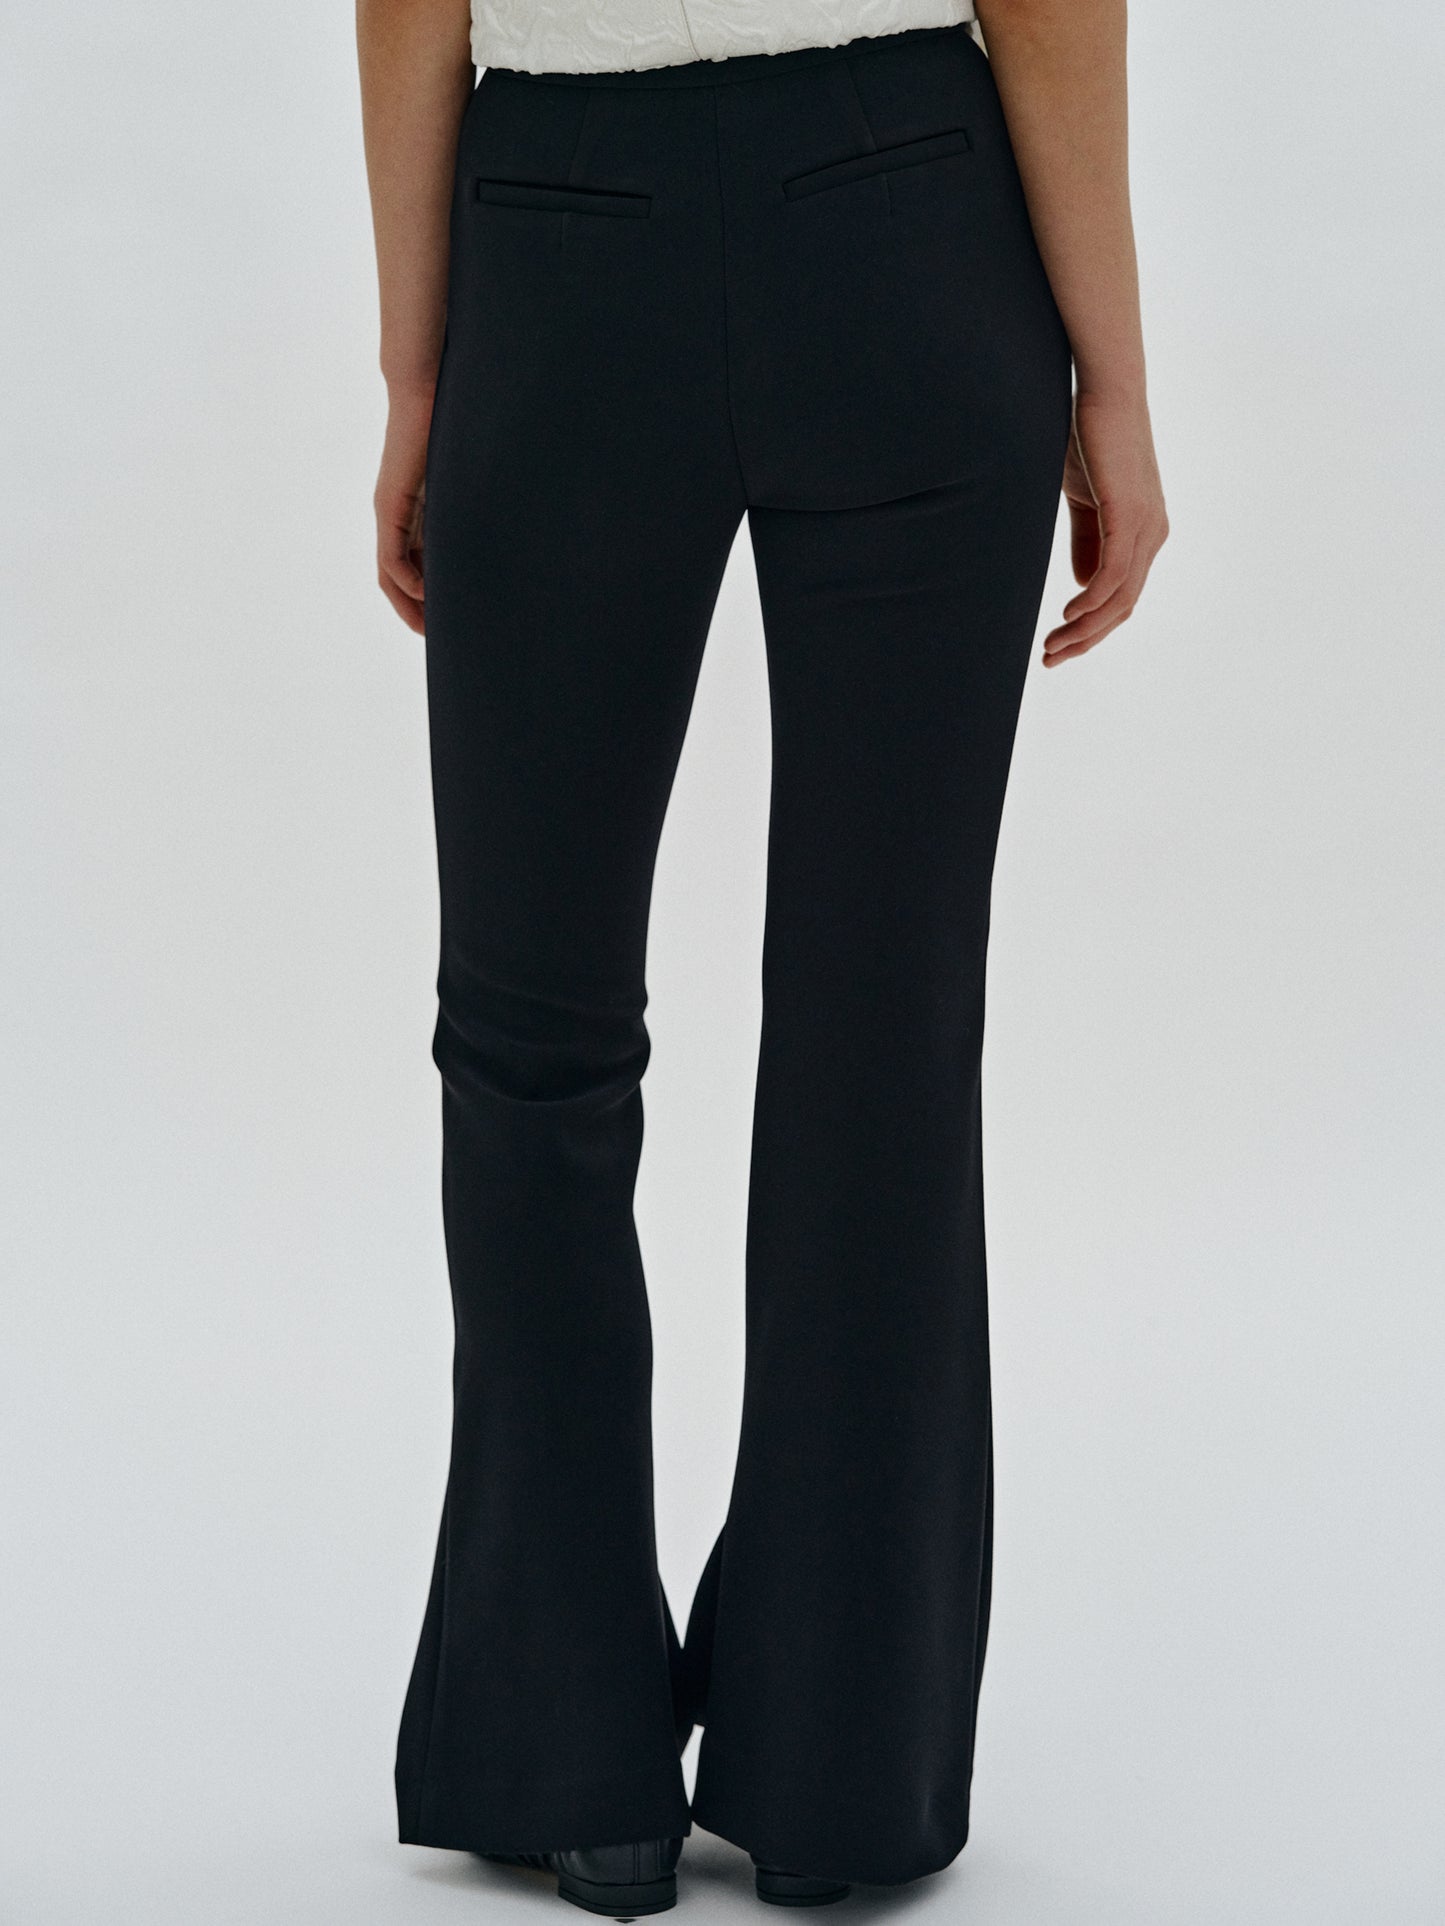 Fitted Long Slit Trousers, Black